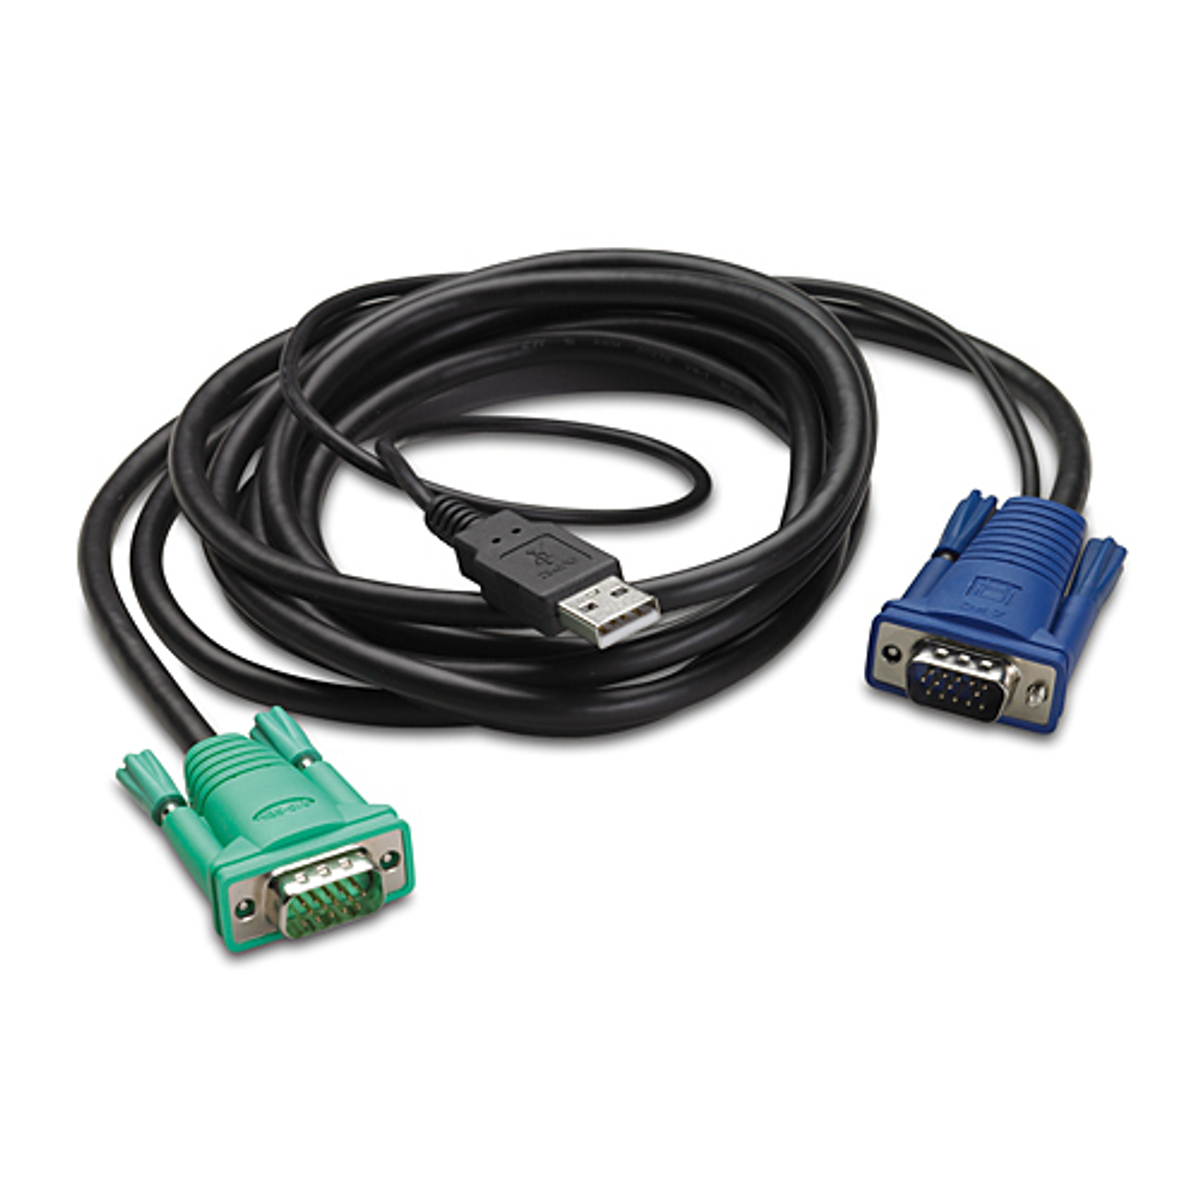 INTEGRATED LCD KVM USB CABLE - 1.8m